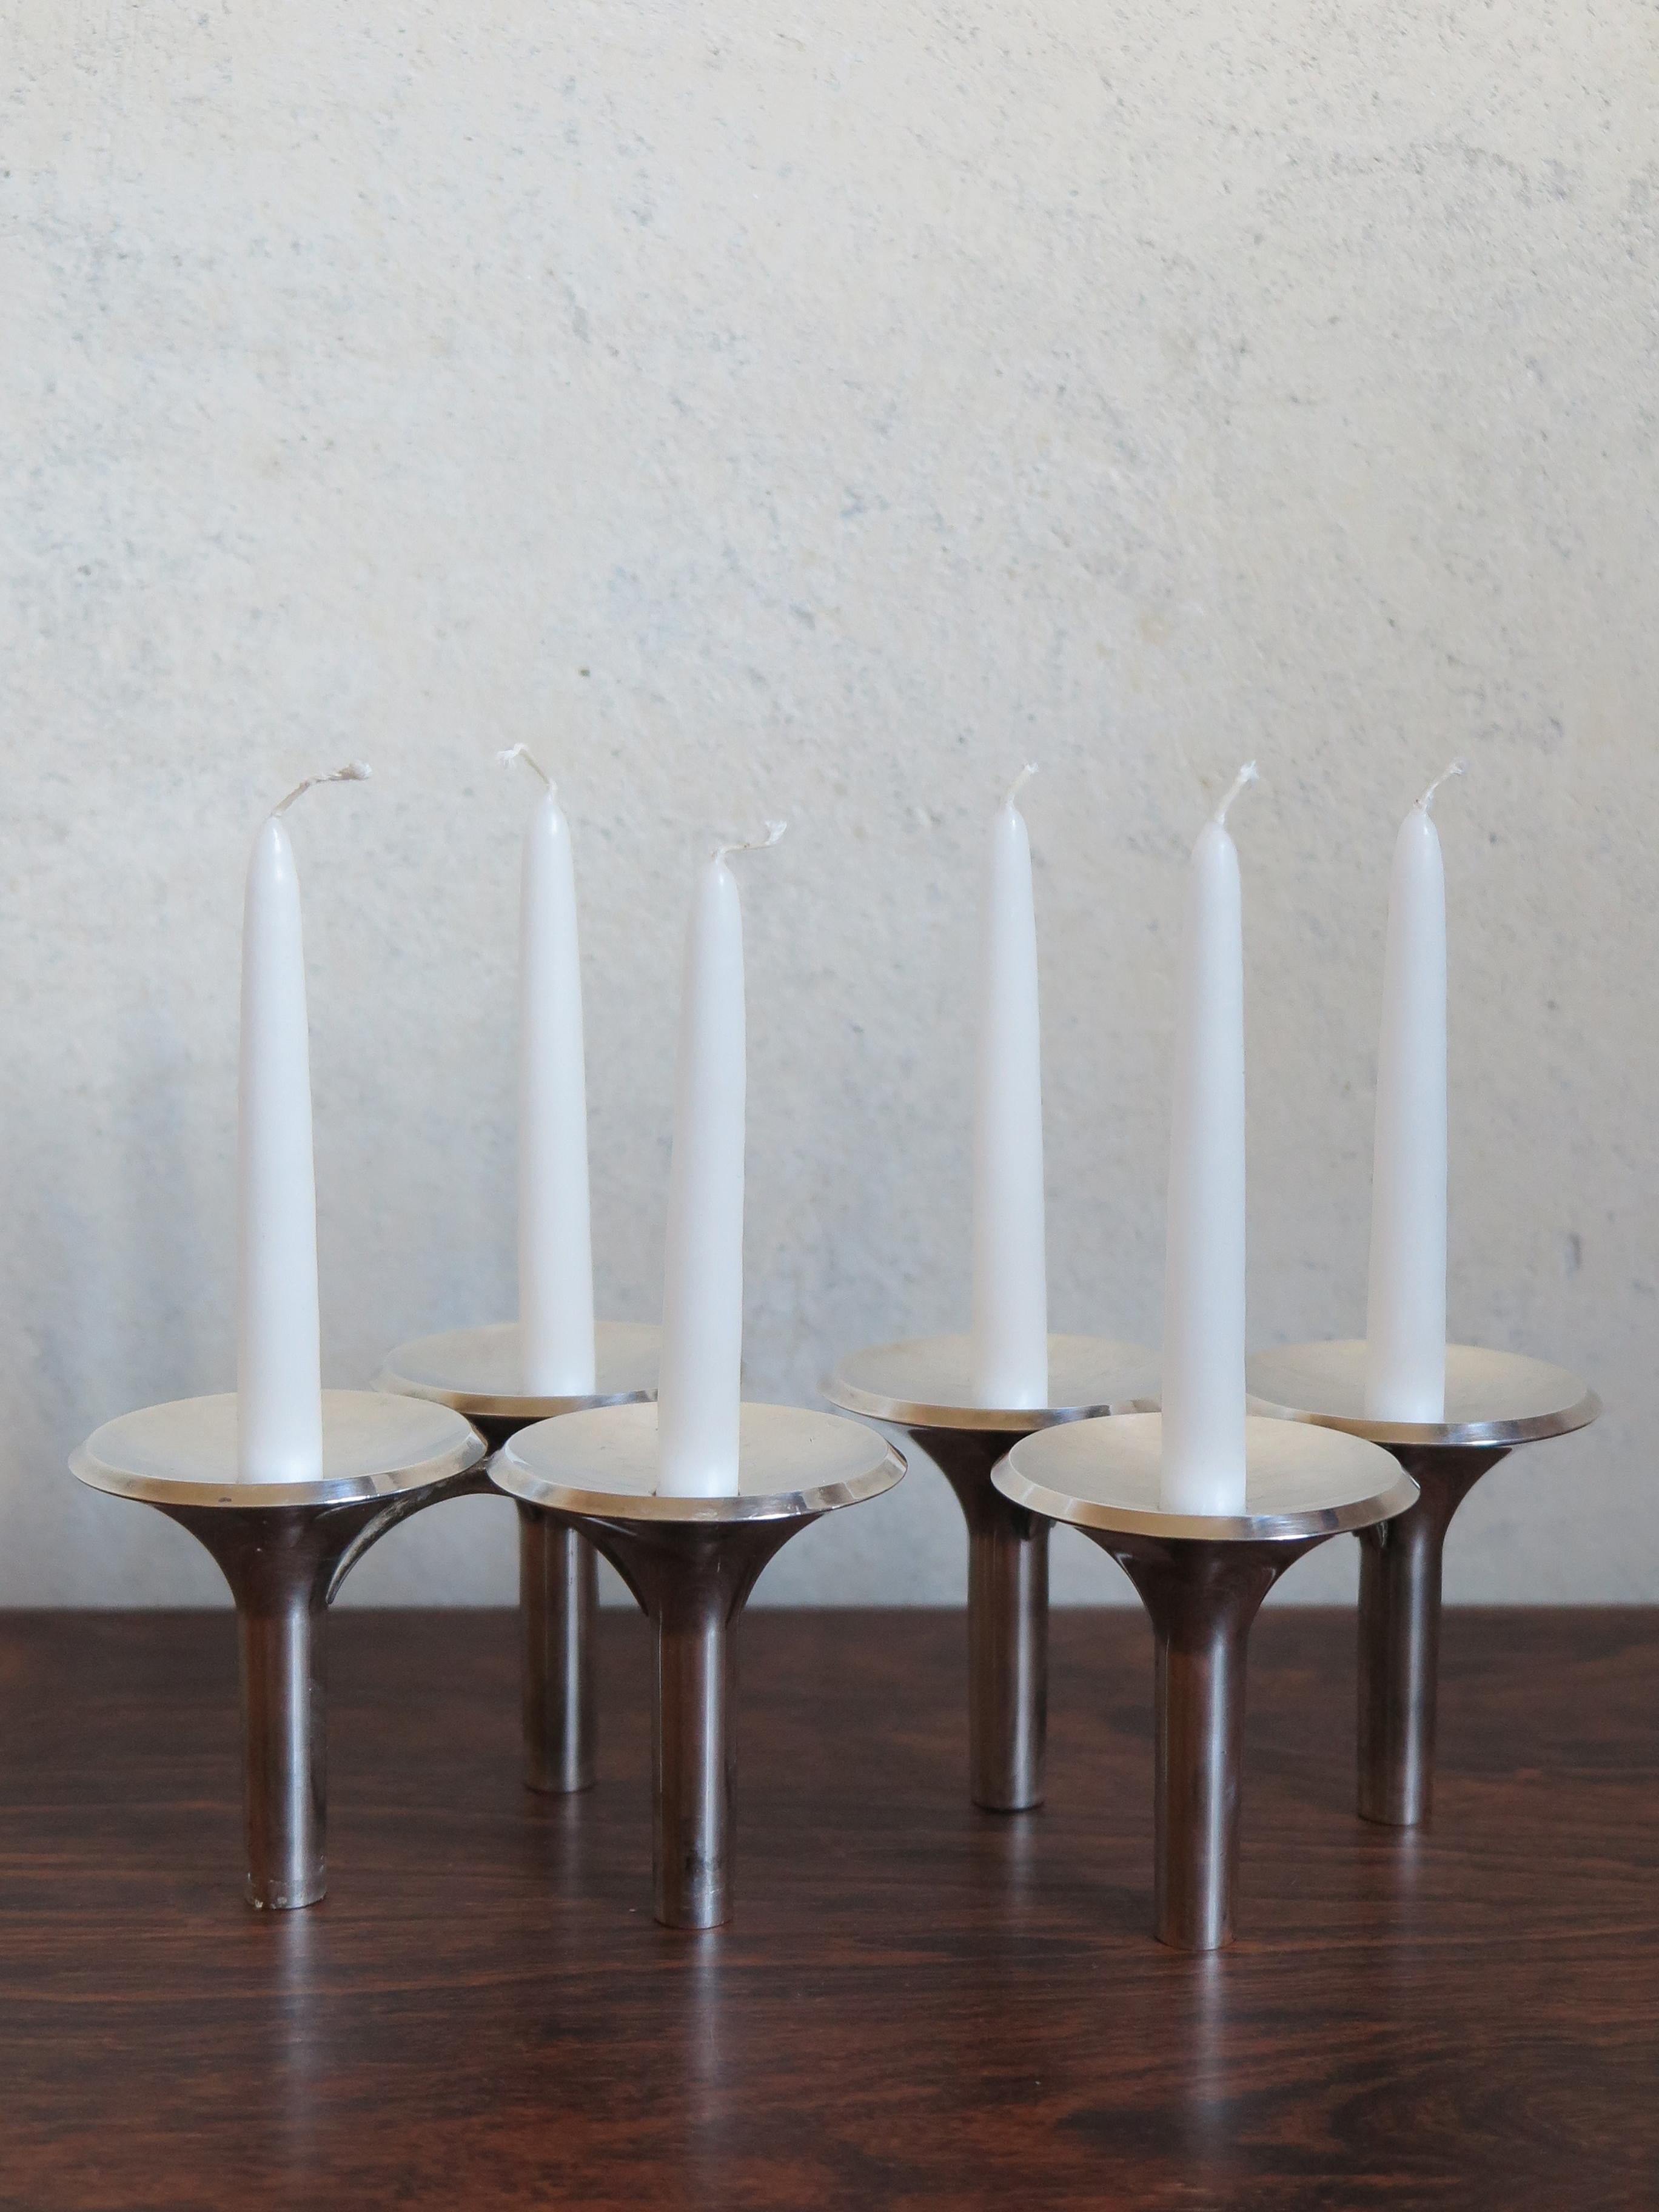 German Ceasar Stoffi and Fritz Nagel Silver Plated Candleholders, 1960s For Sale